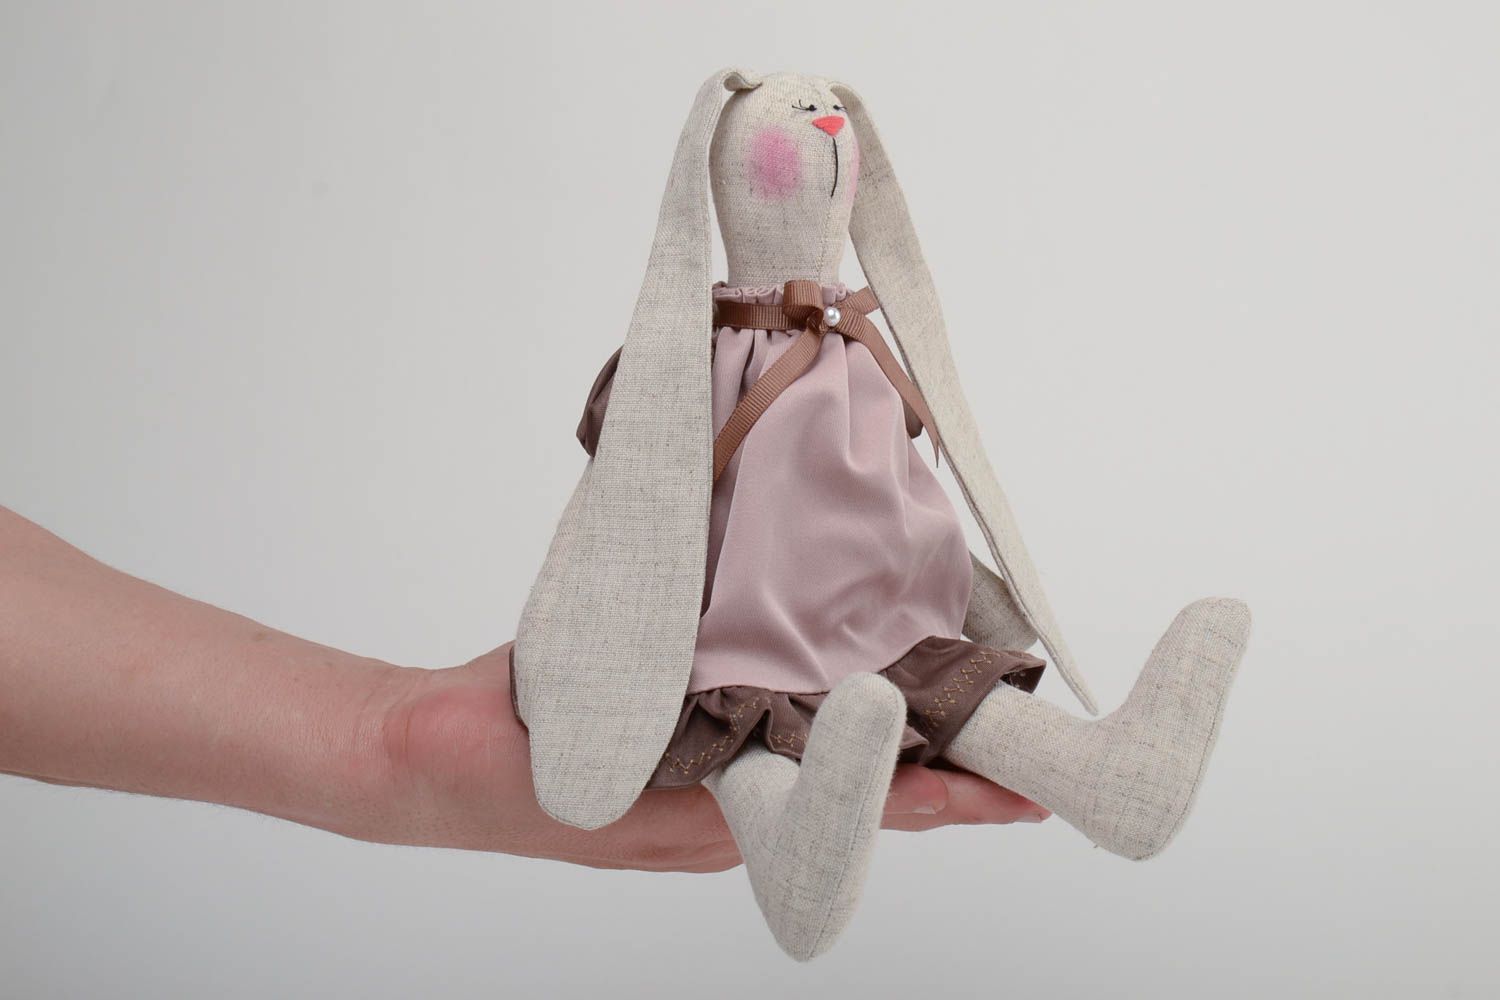 Handmade designer small fabric soft toy rabbit with long ears in dress for kids photo 5